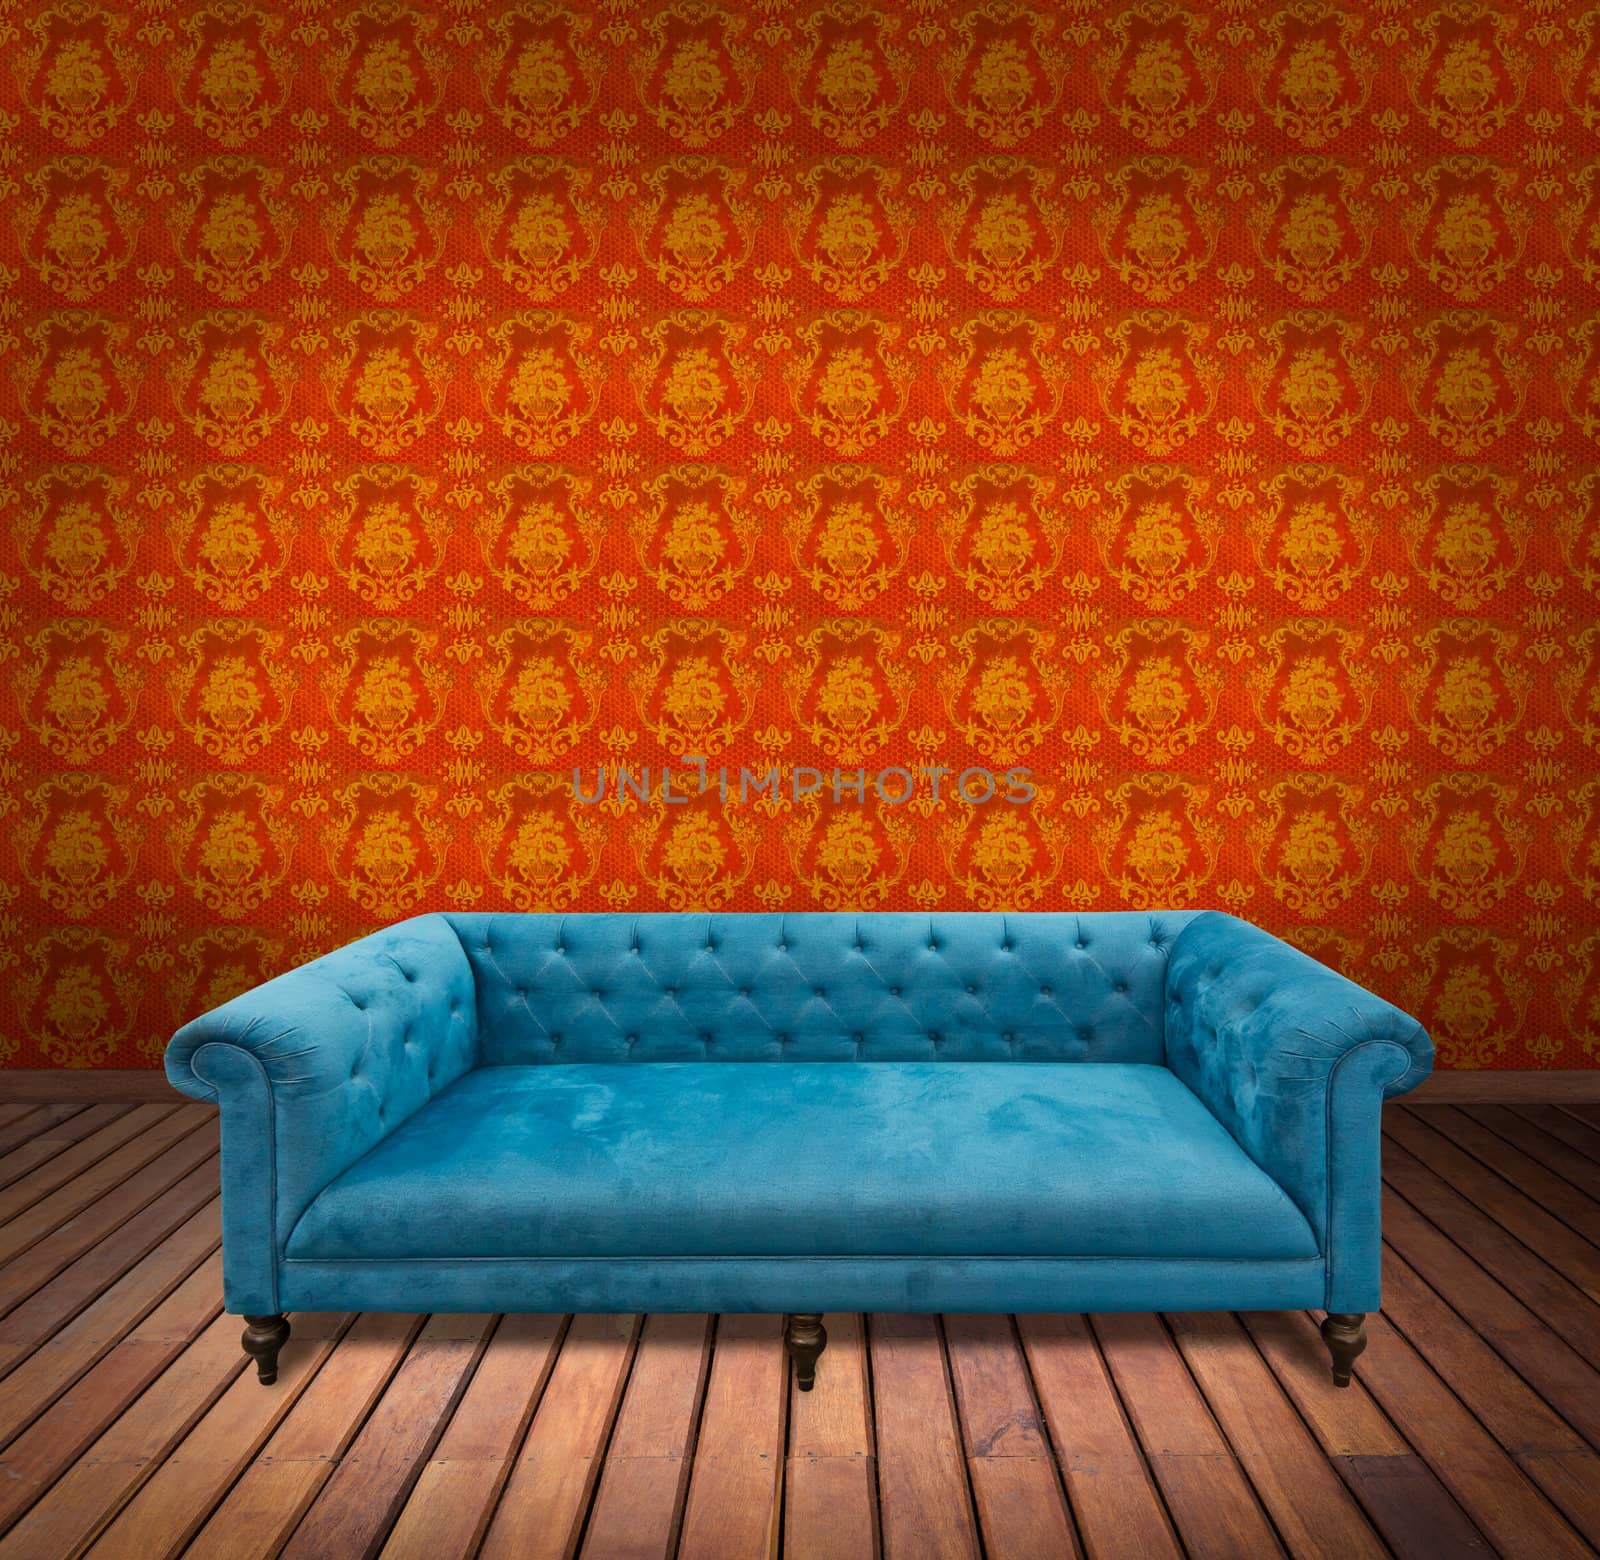 Sofa in yellow wallpaper room by tungphoto